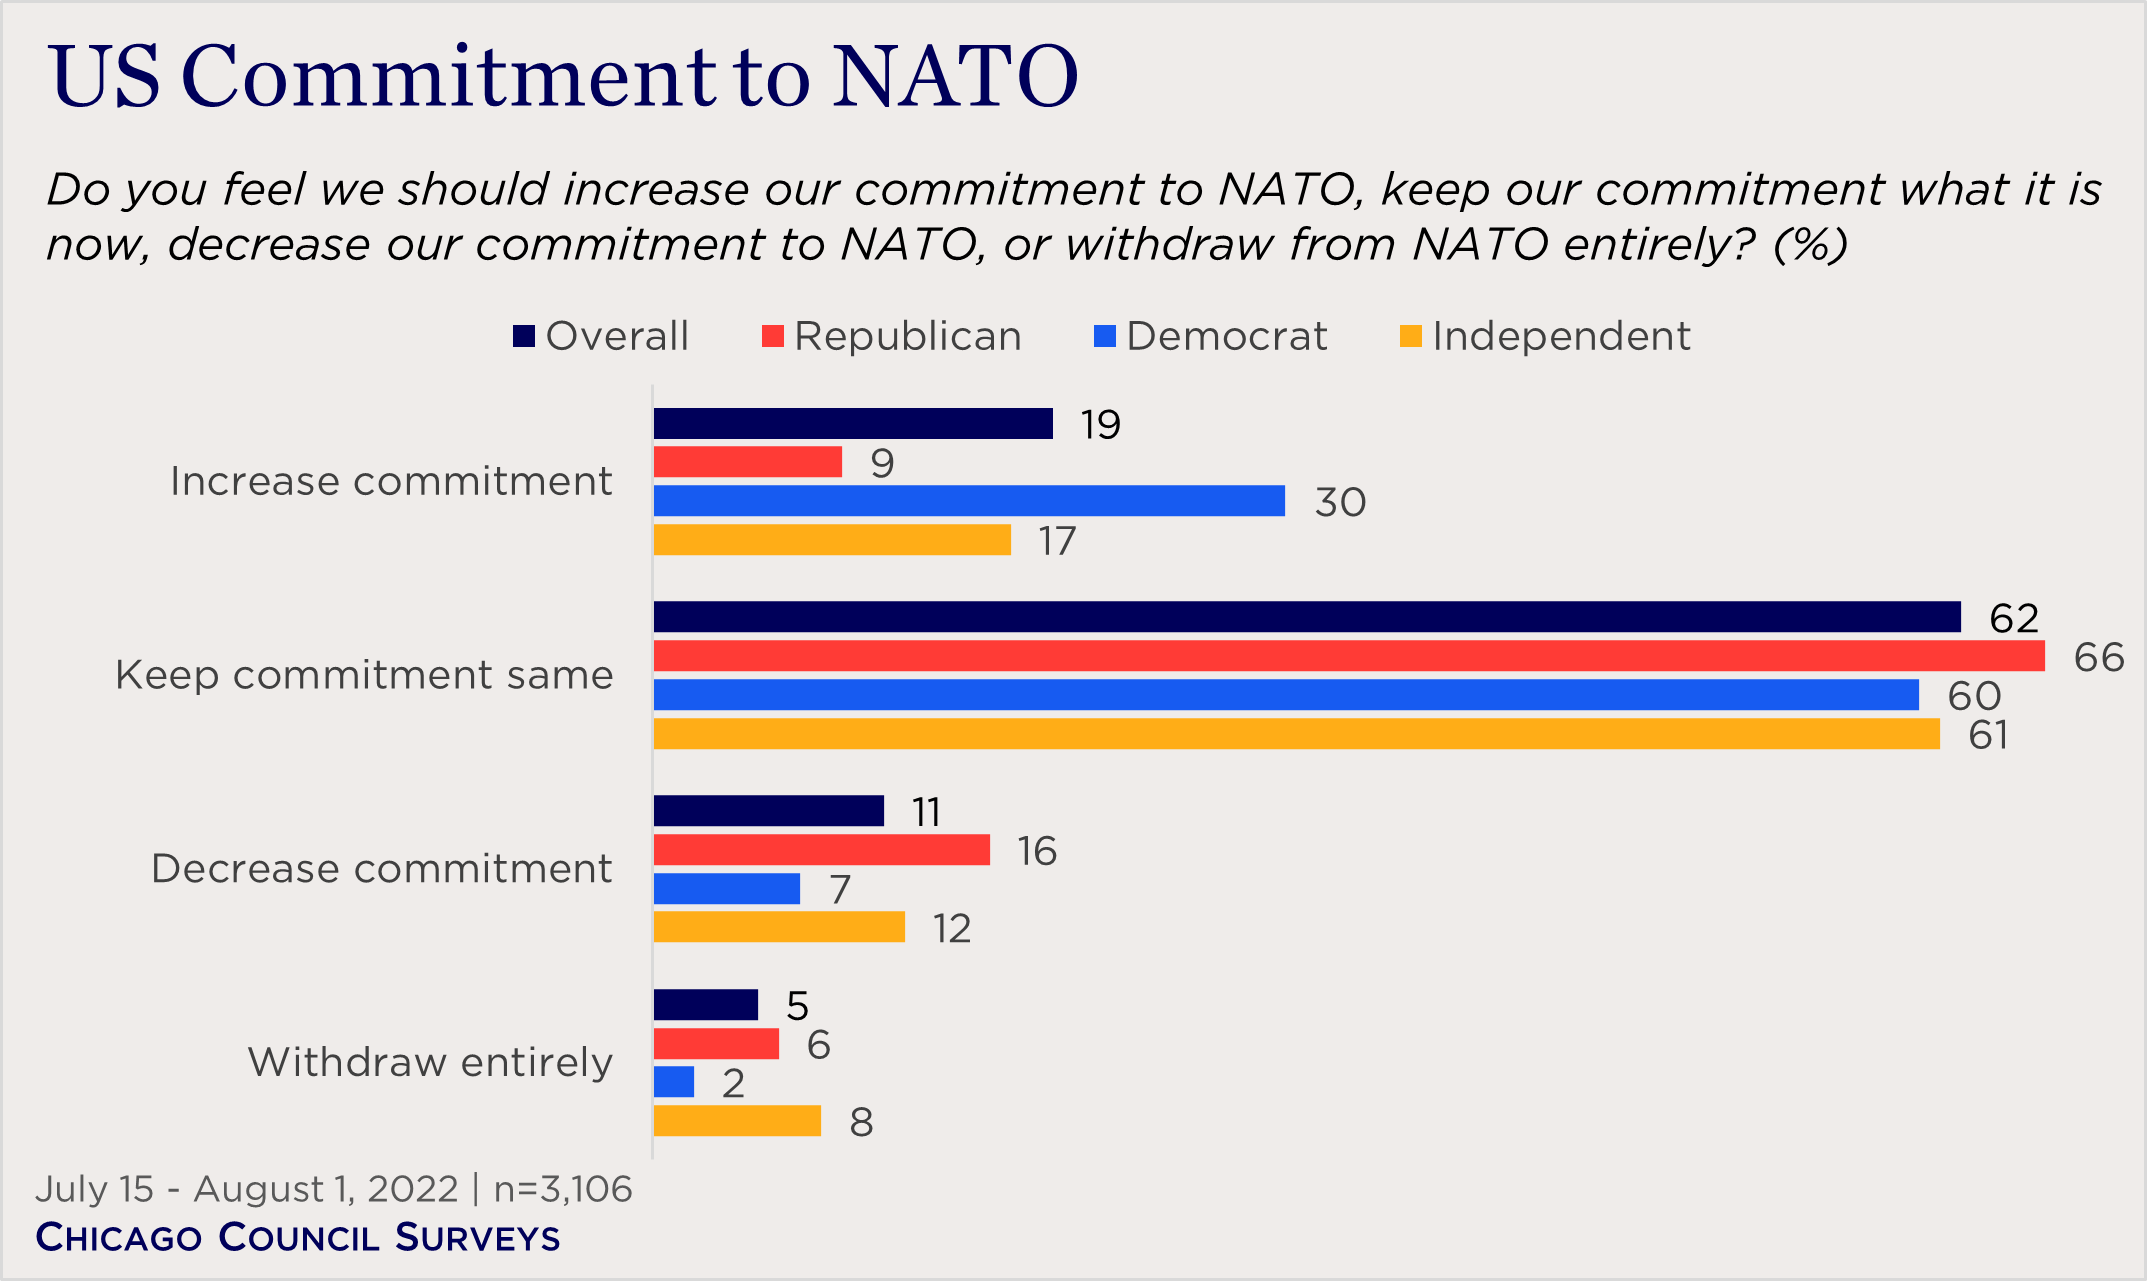 "bar chart showing partisan views on commitments to NATO"